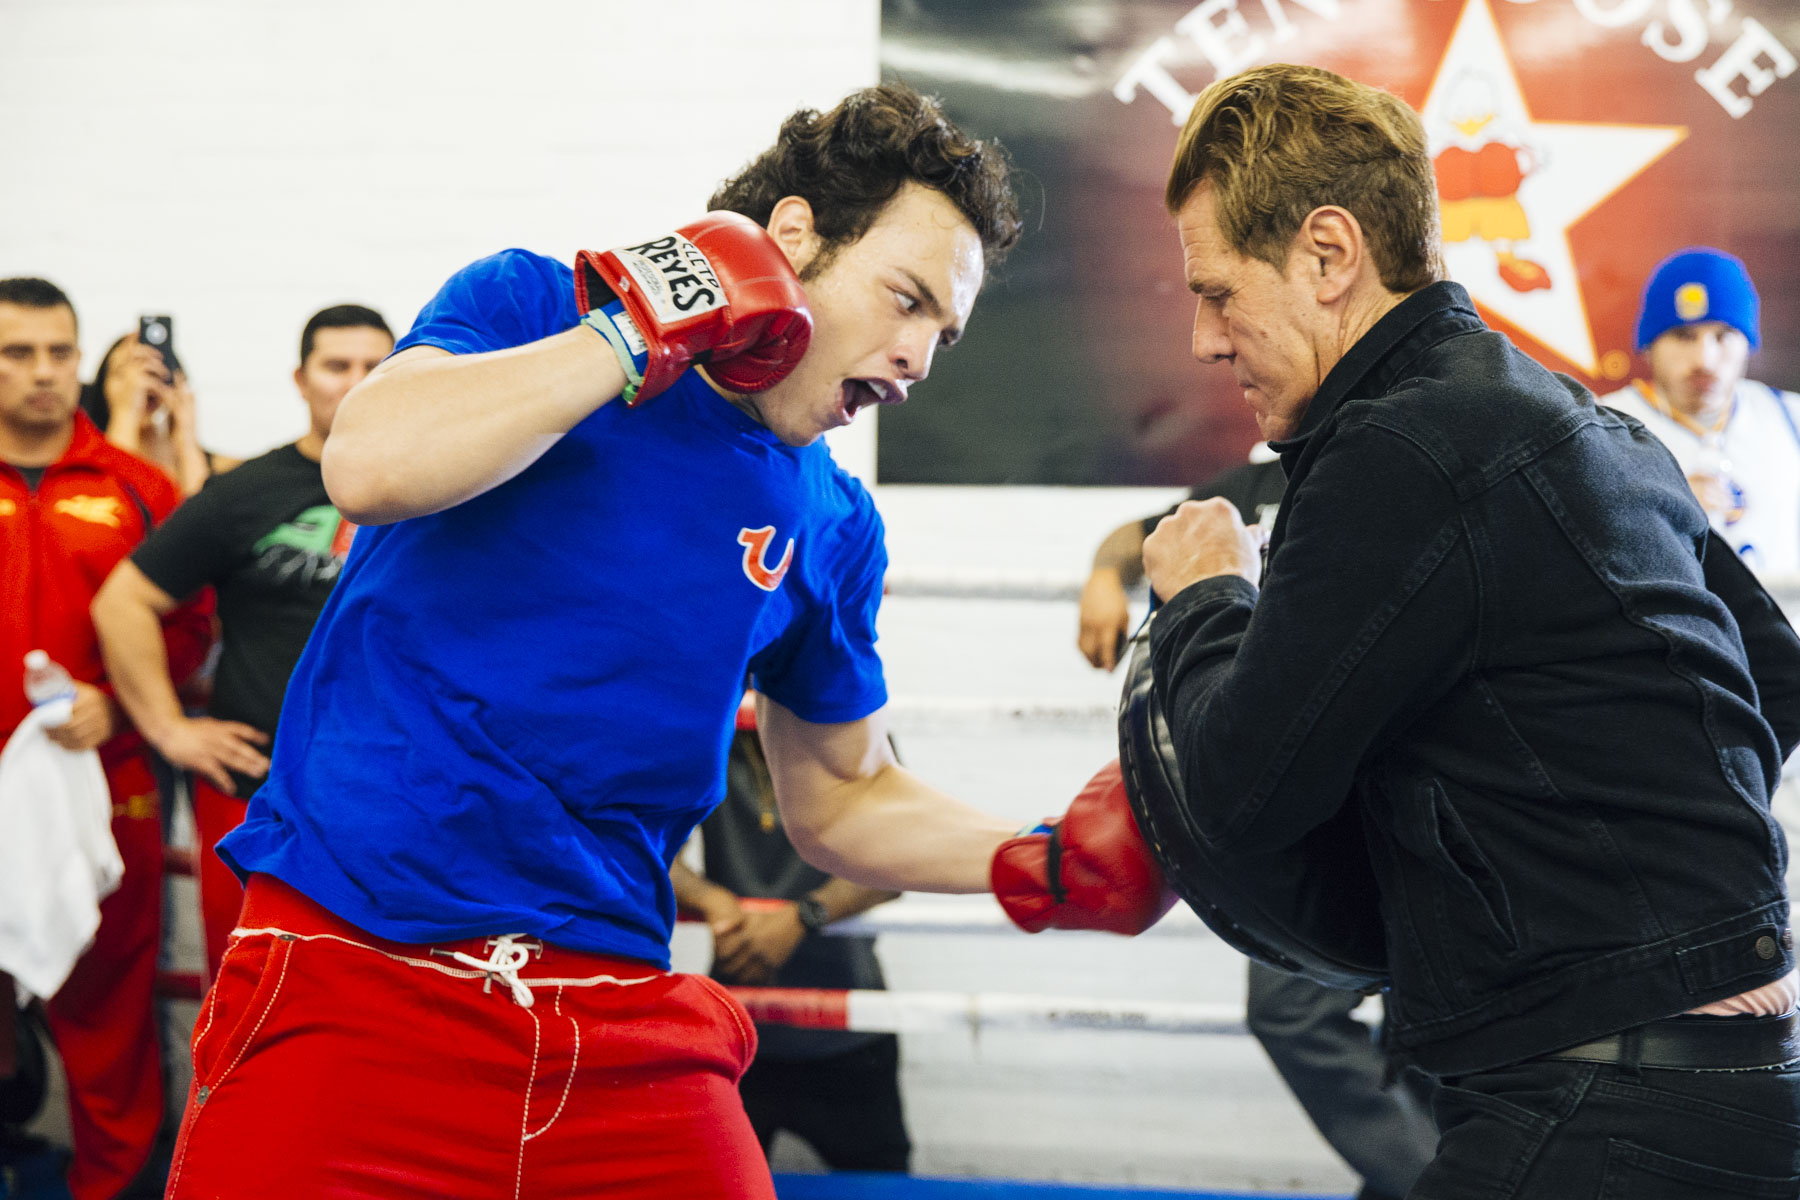 Chavez Jr arrested again, this time for possession of a gun